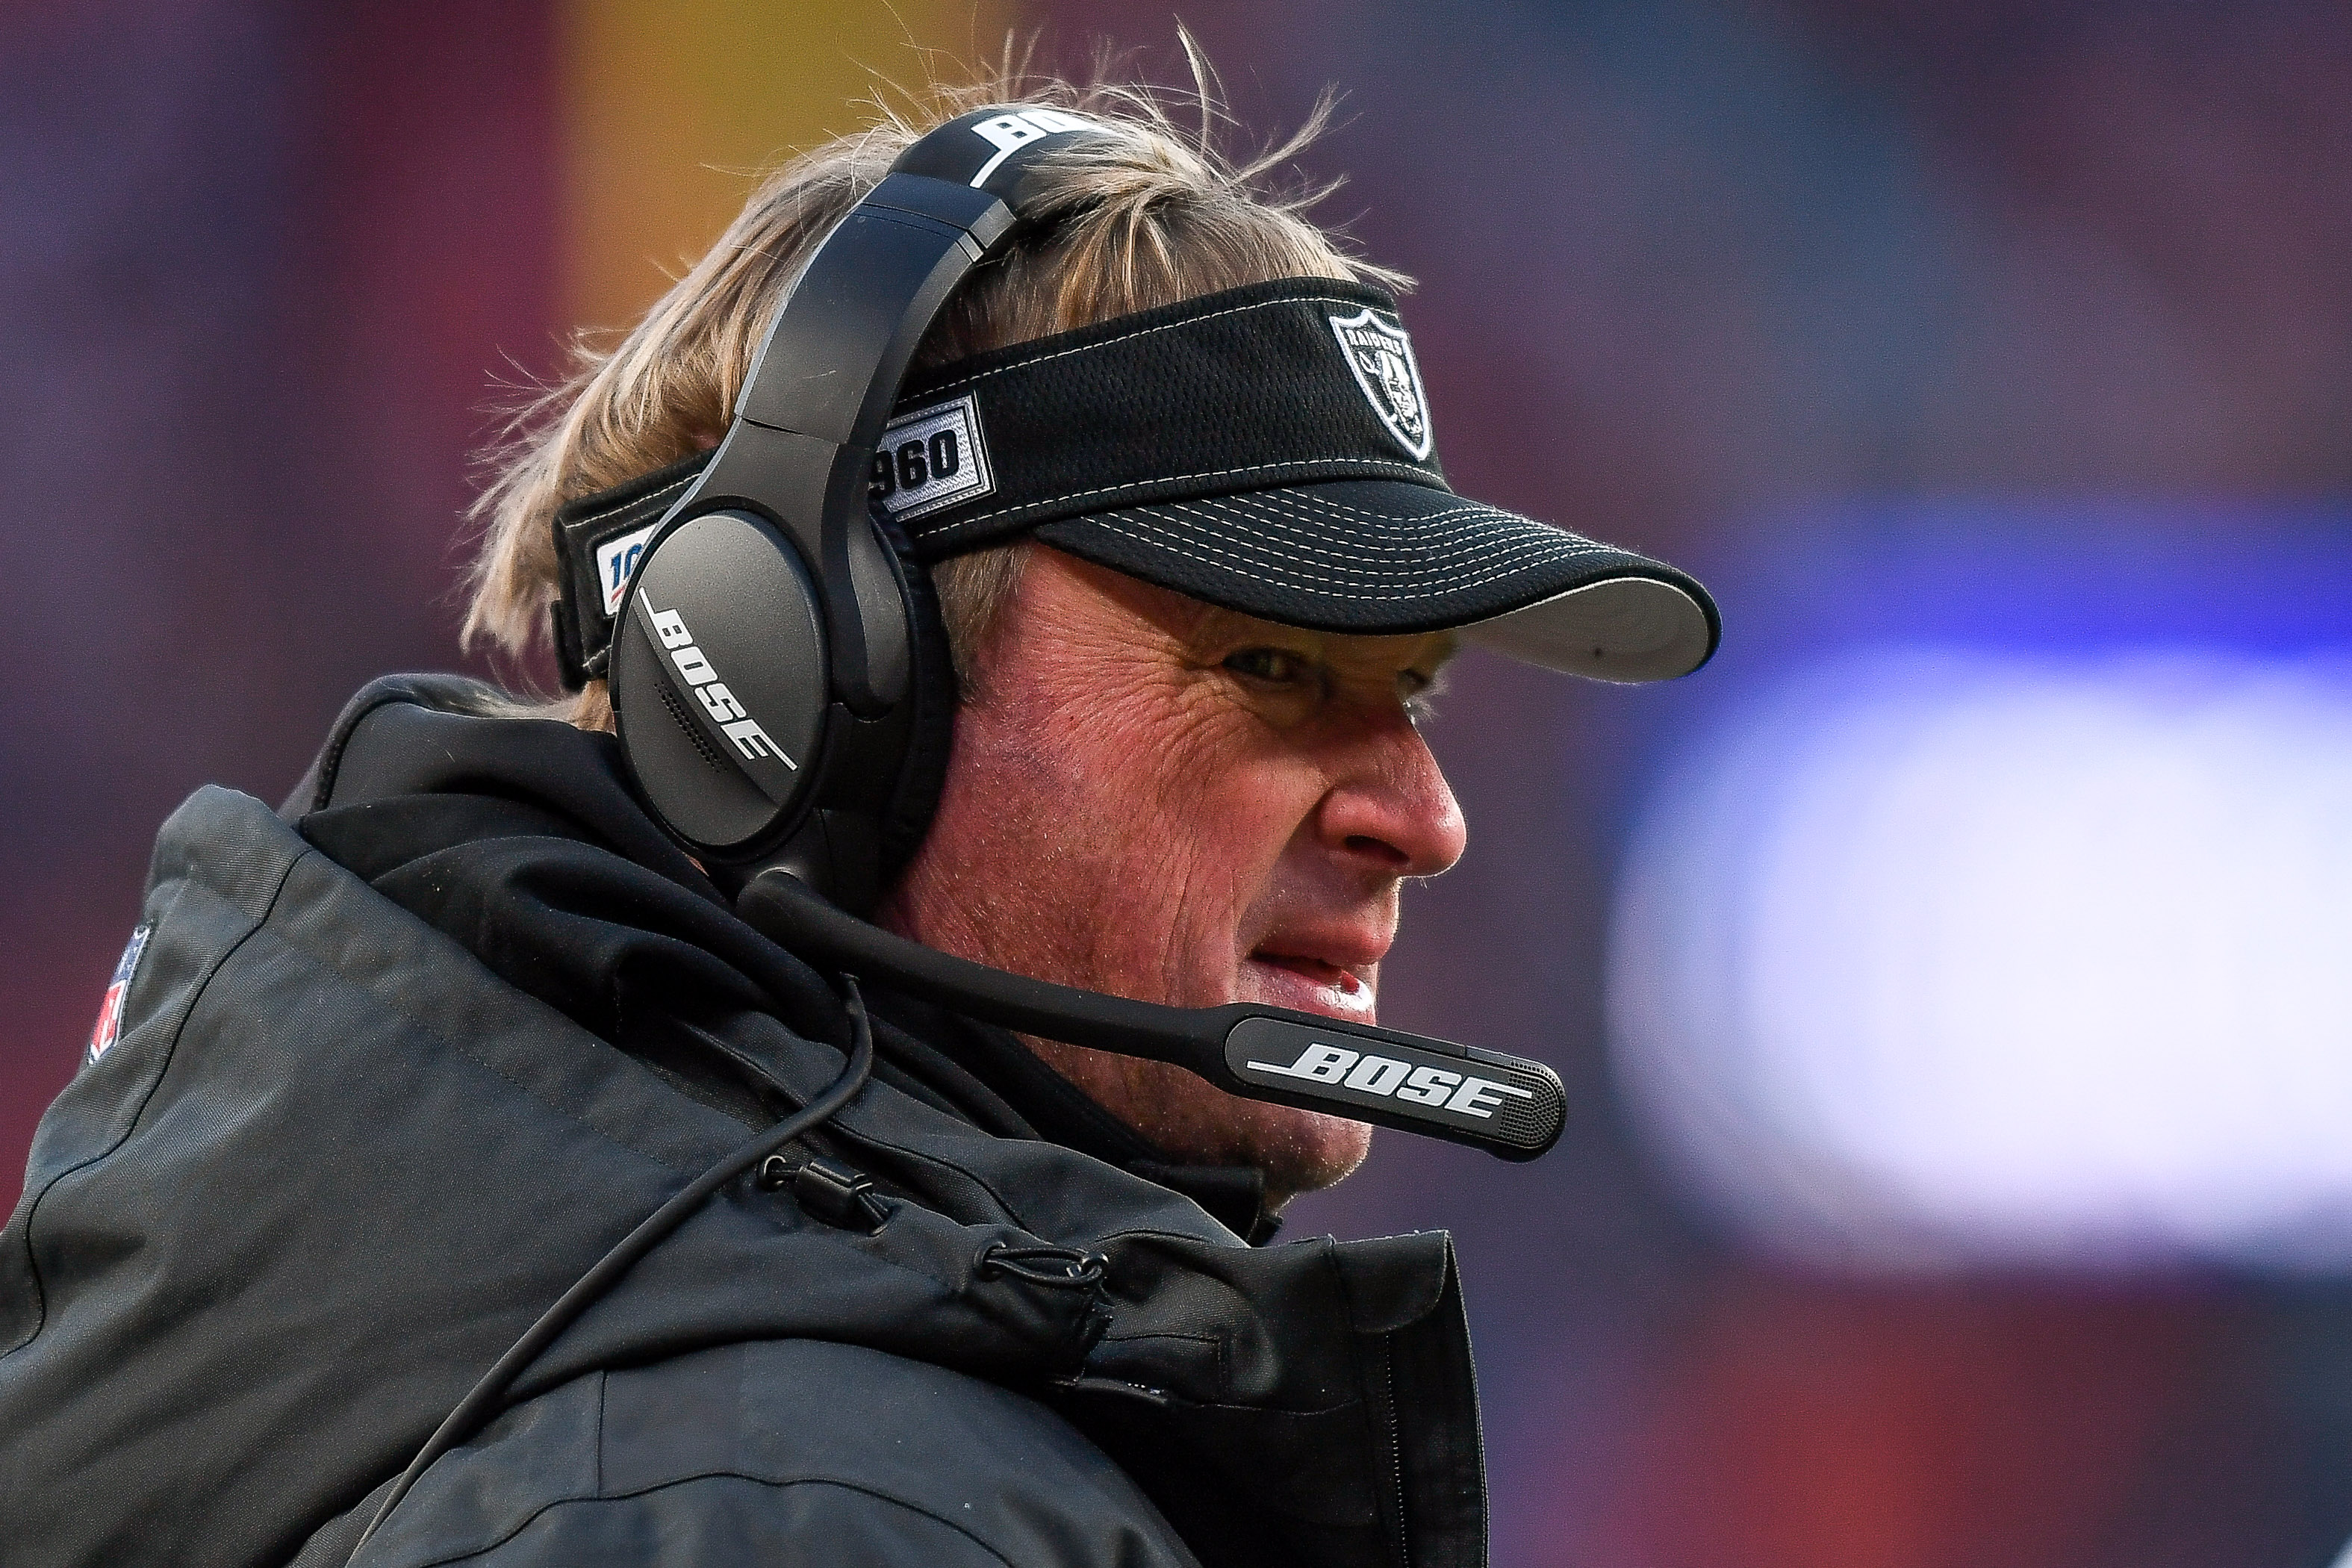 Head coach Jon Gruden of the Oakland Raiders looks on from the sideline during a game